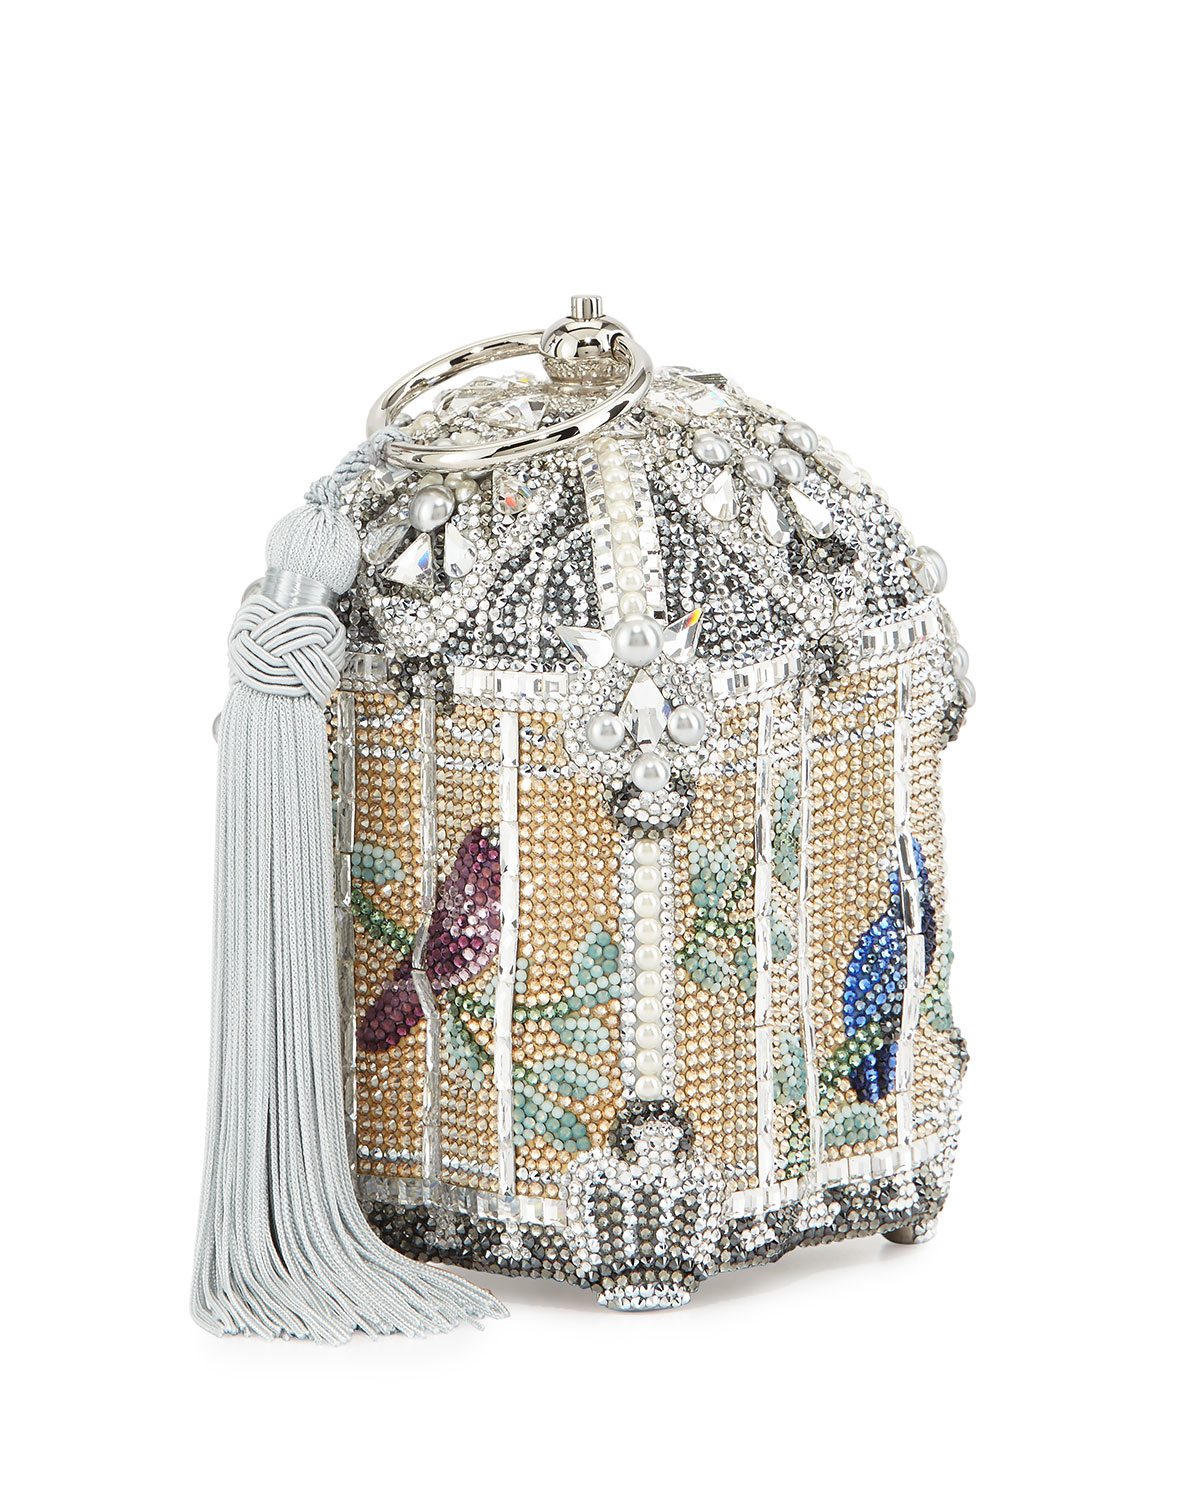 Lyst - Judith Leiber Couture Birdcage Crystal Clutch Bag in Metallic